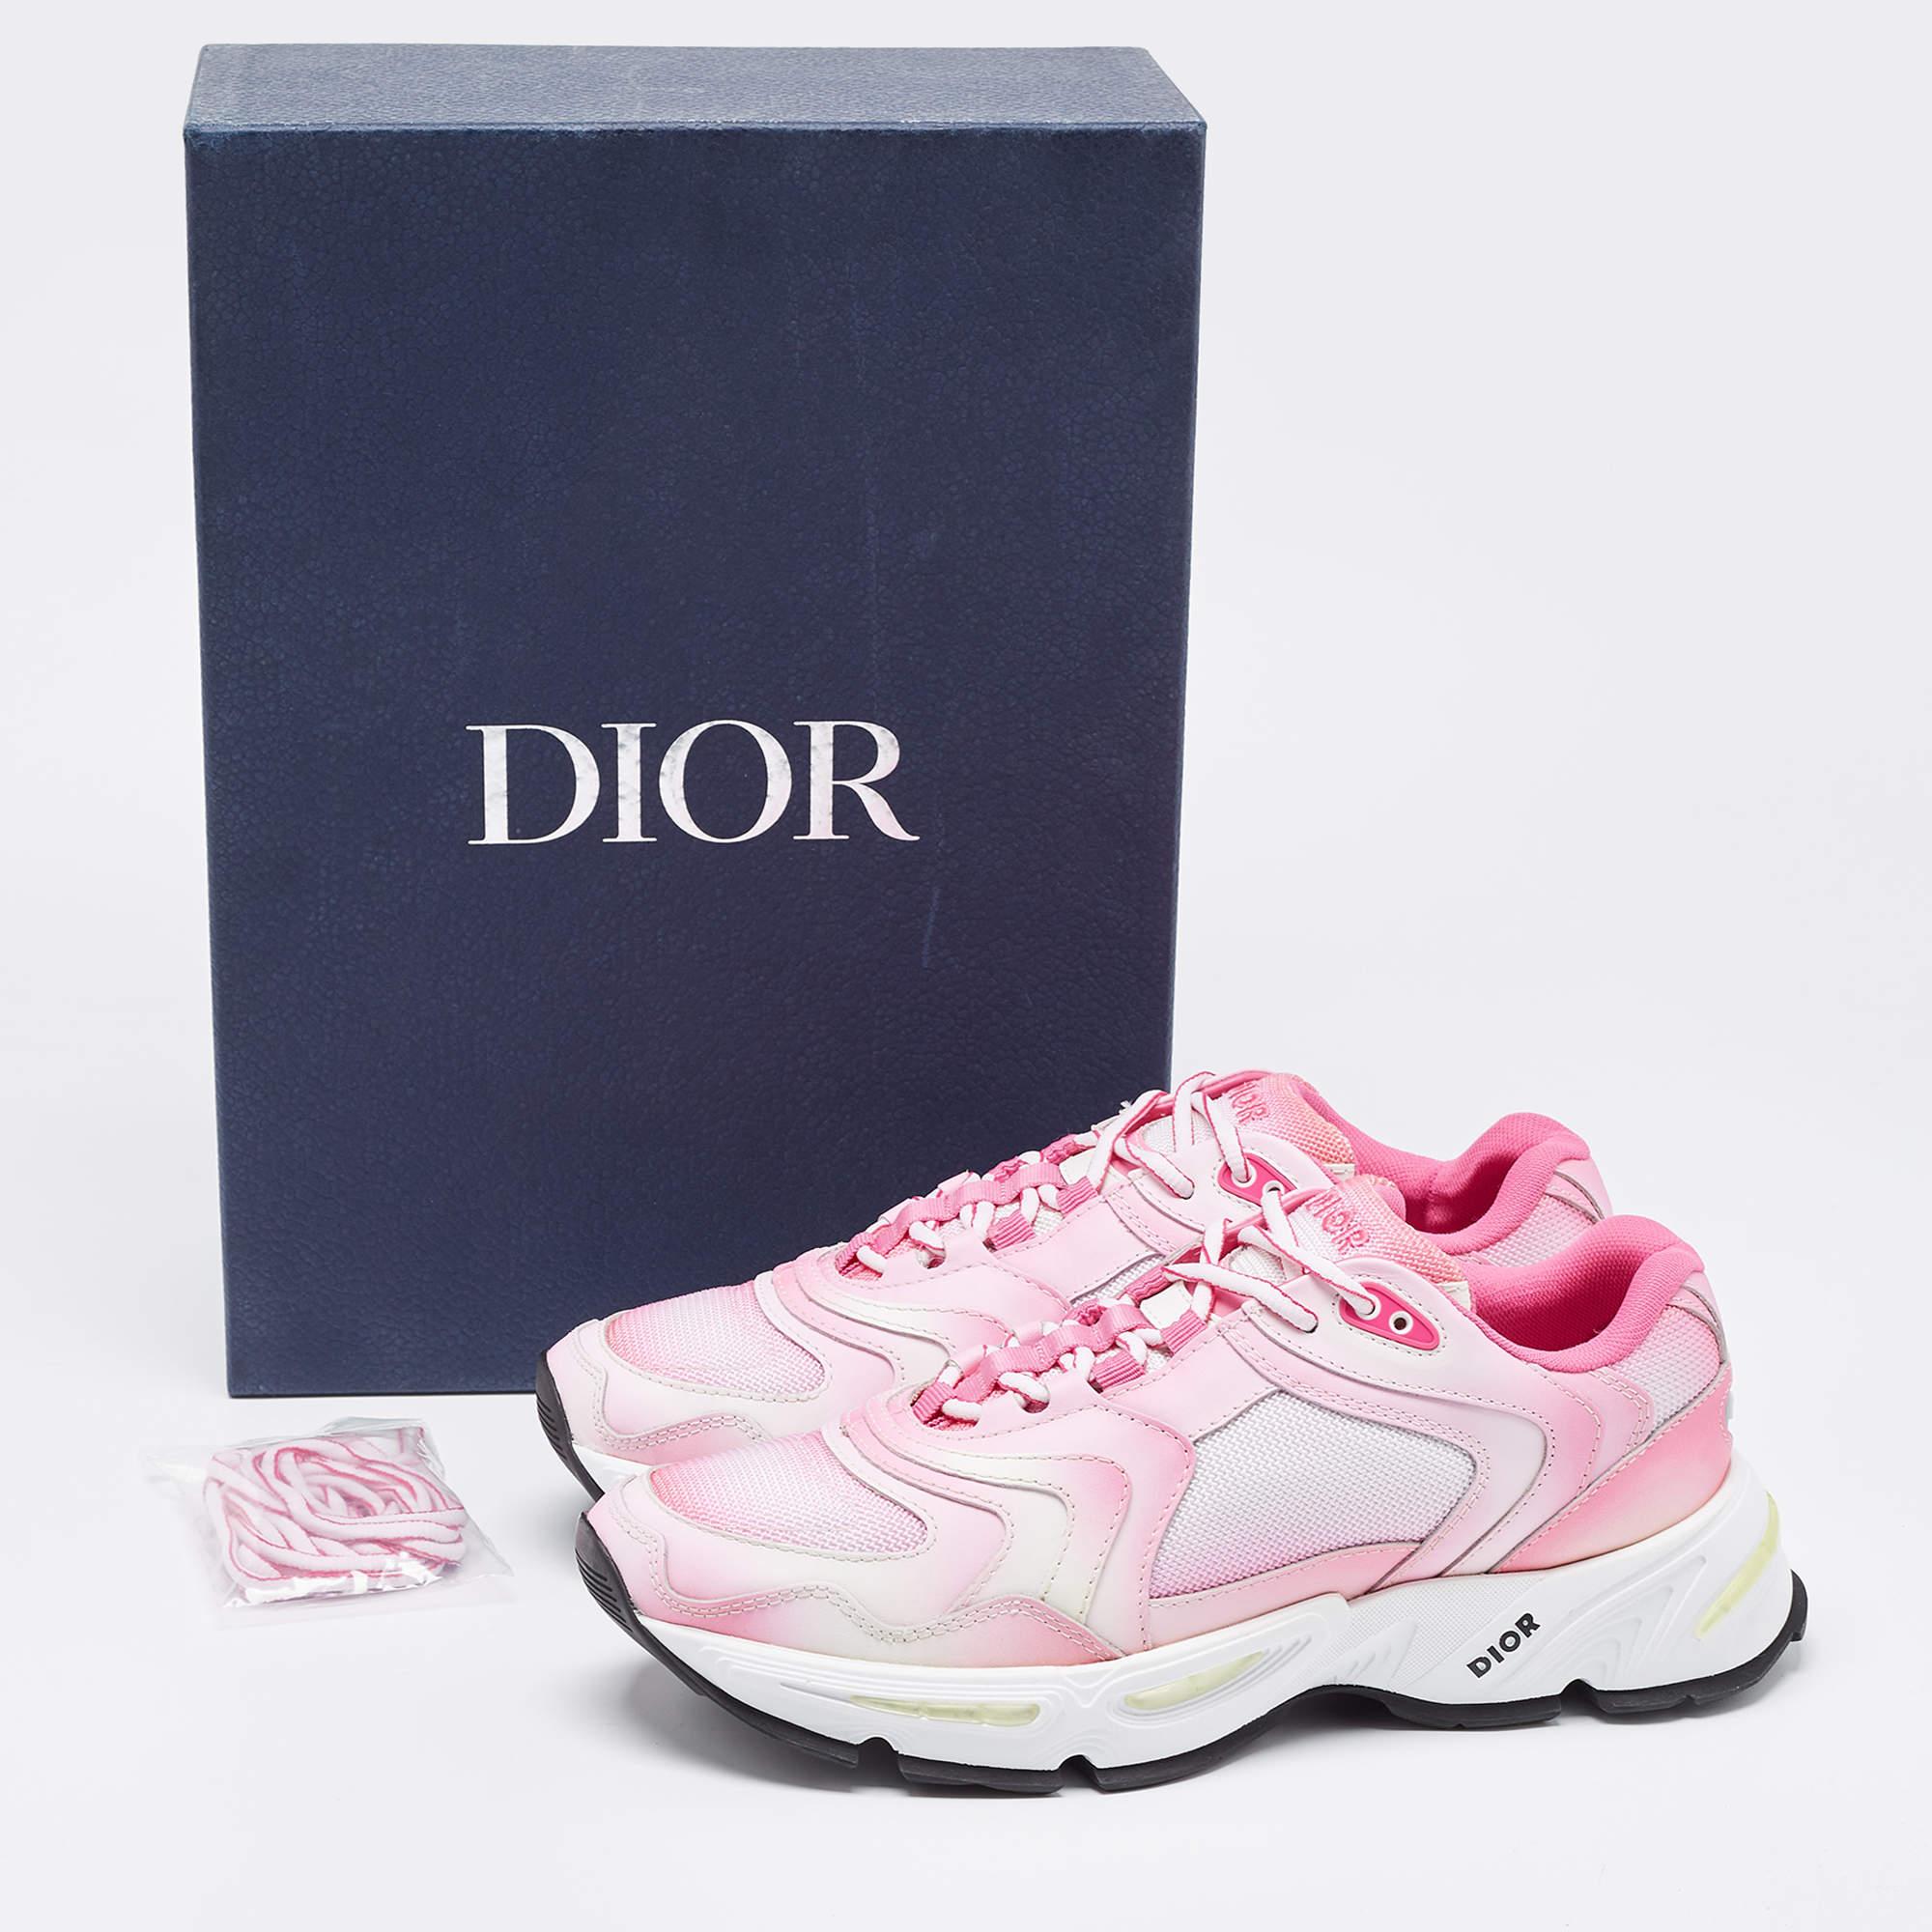 Dior Pink/White Mesh and Leather CD1 Gradient Sneakers Size 41 For Sale 1